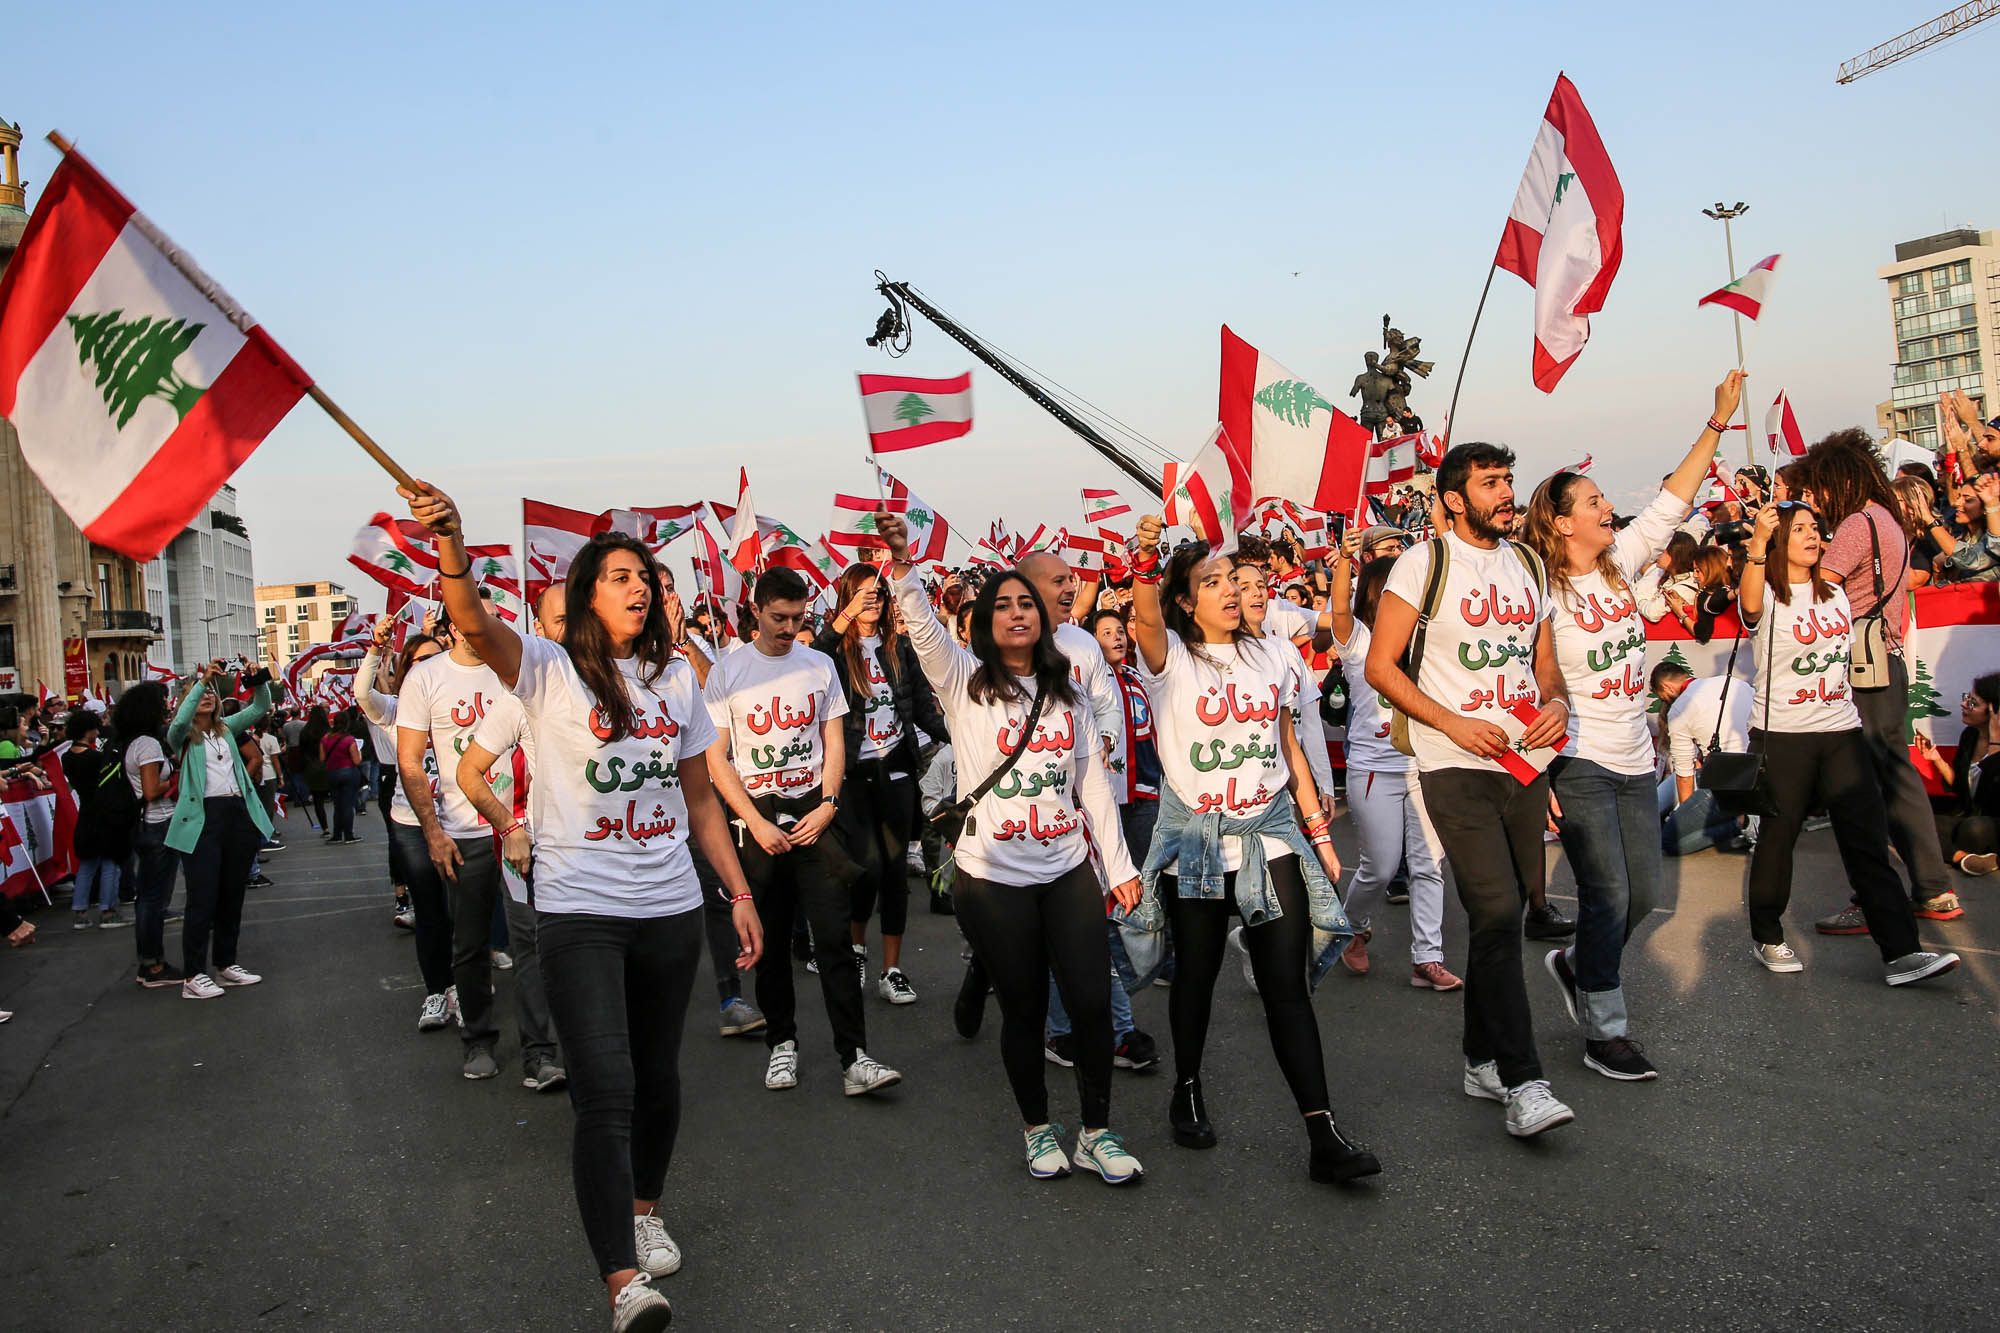 Beirut, Lebanon - November 22, 2019: Lebanese marching for Lebanon's Independence Day in a Civil Parade while protesting against the current government and corruption in the country. Editorial credit: Hiba Al Kallas / Shutterstock.com.